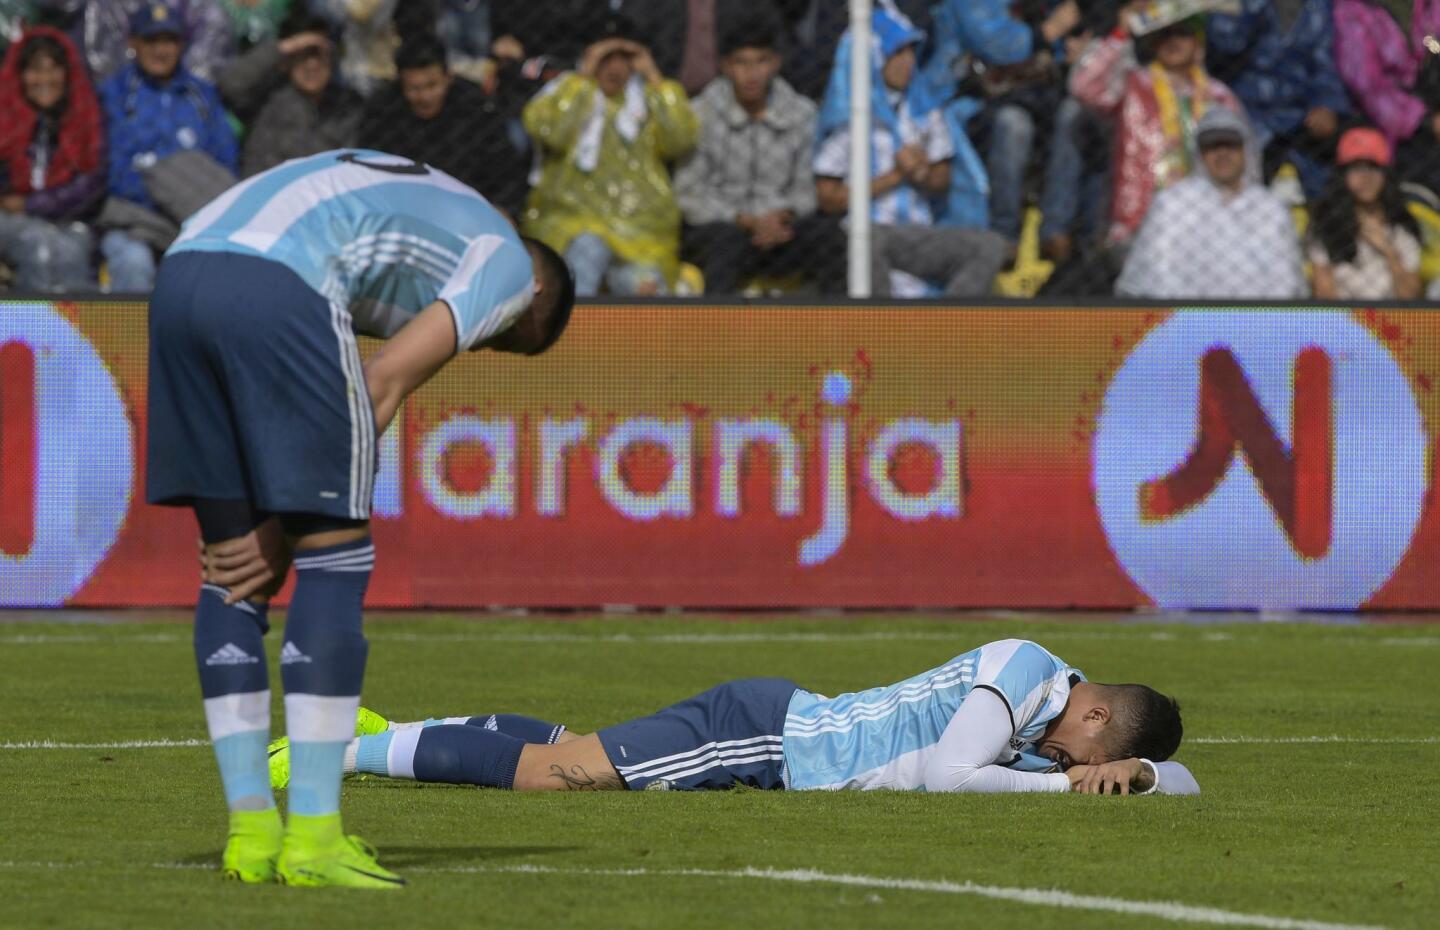 Argentina's Marcos Rojo (R) and Mateo Musacchio react during their 2018 FIFA World Cup qualifier football match in La Paz, on March 28, 2017. / AFP PHOTO / JUAN MABROMATAJUAN MABROMATA/AFP/Getty Images ** OUTS - ELSENT, FPG, CM - OUTS * NM, PH, VA if sourced by CT, LA or MoD **